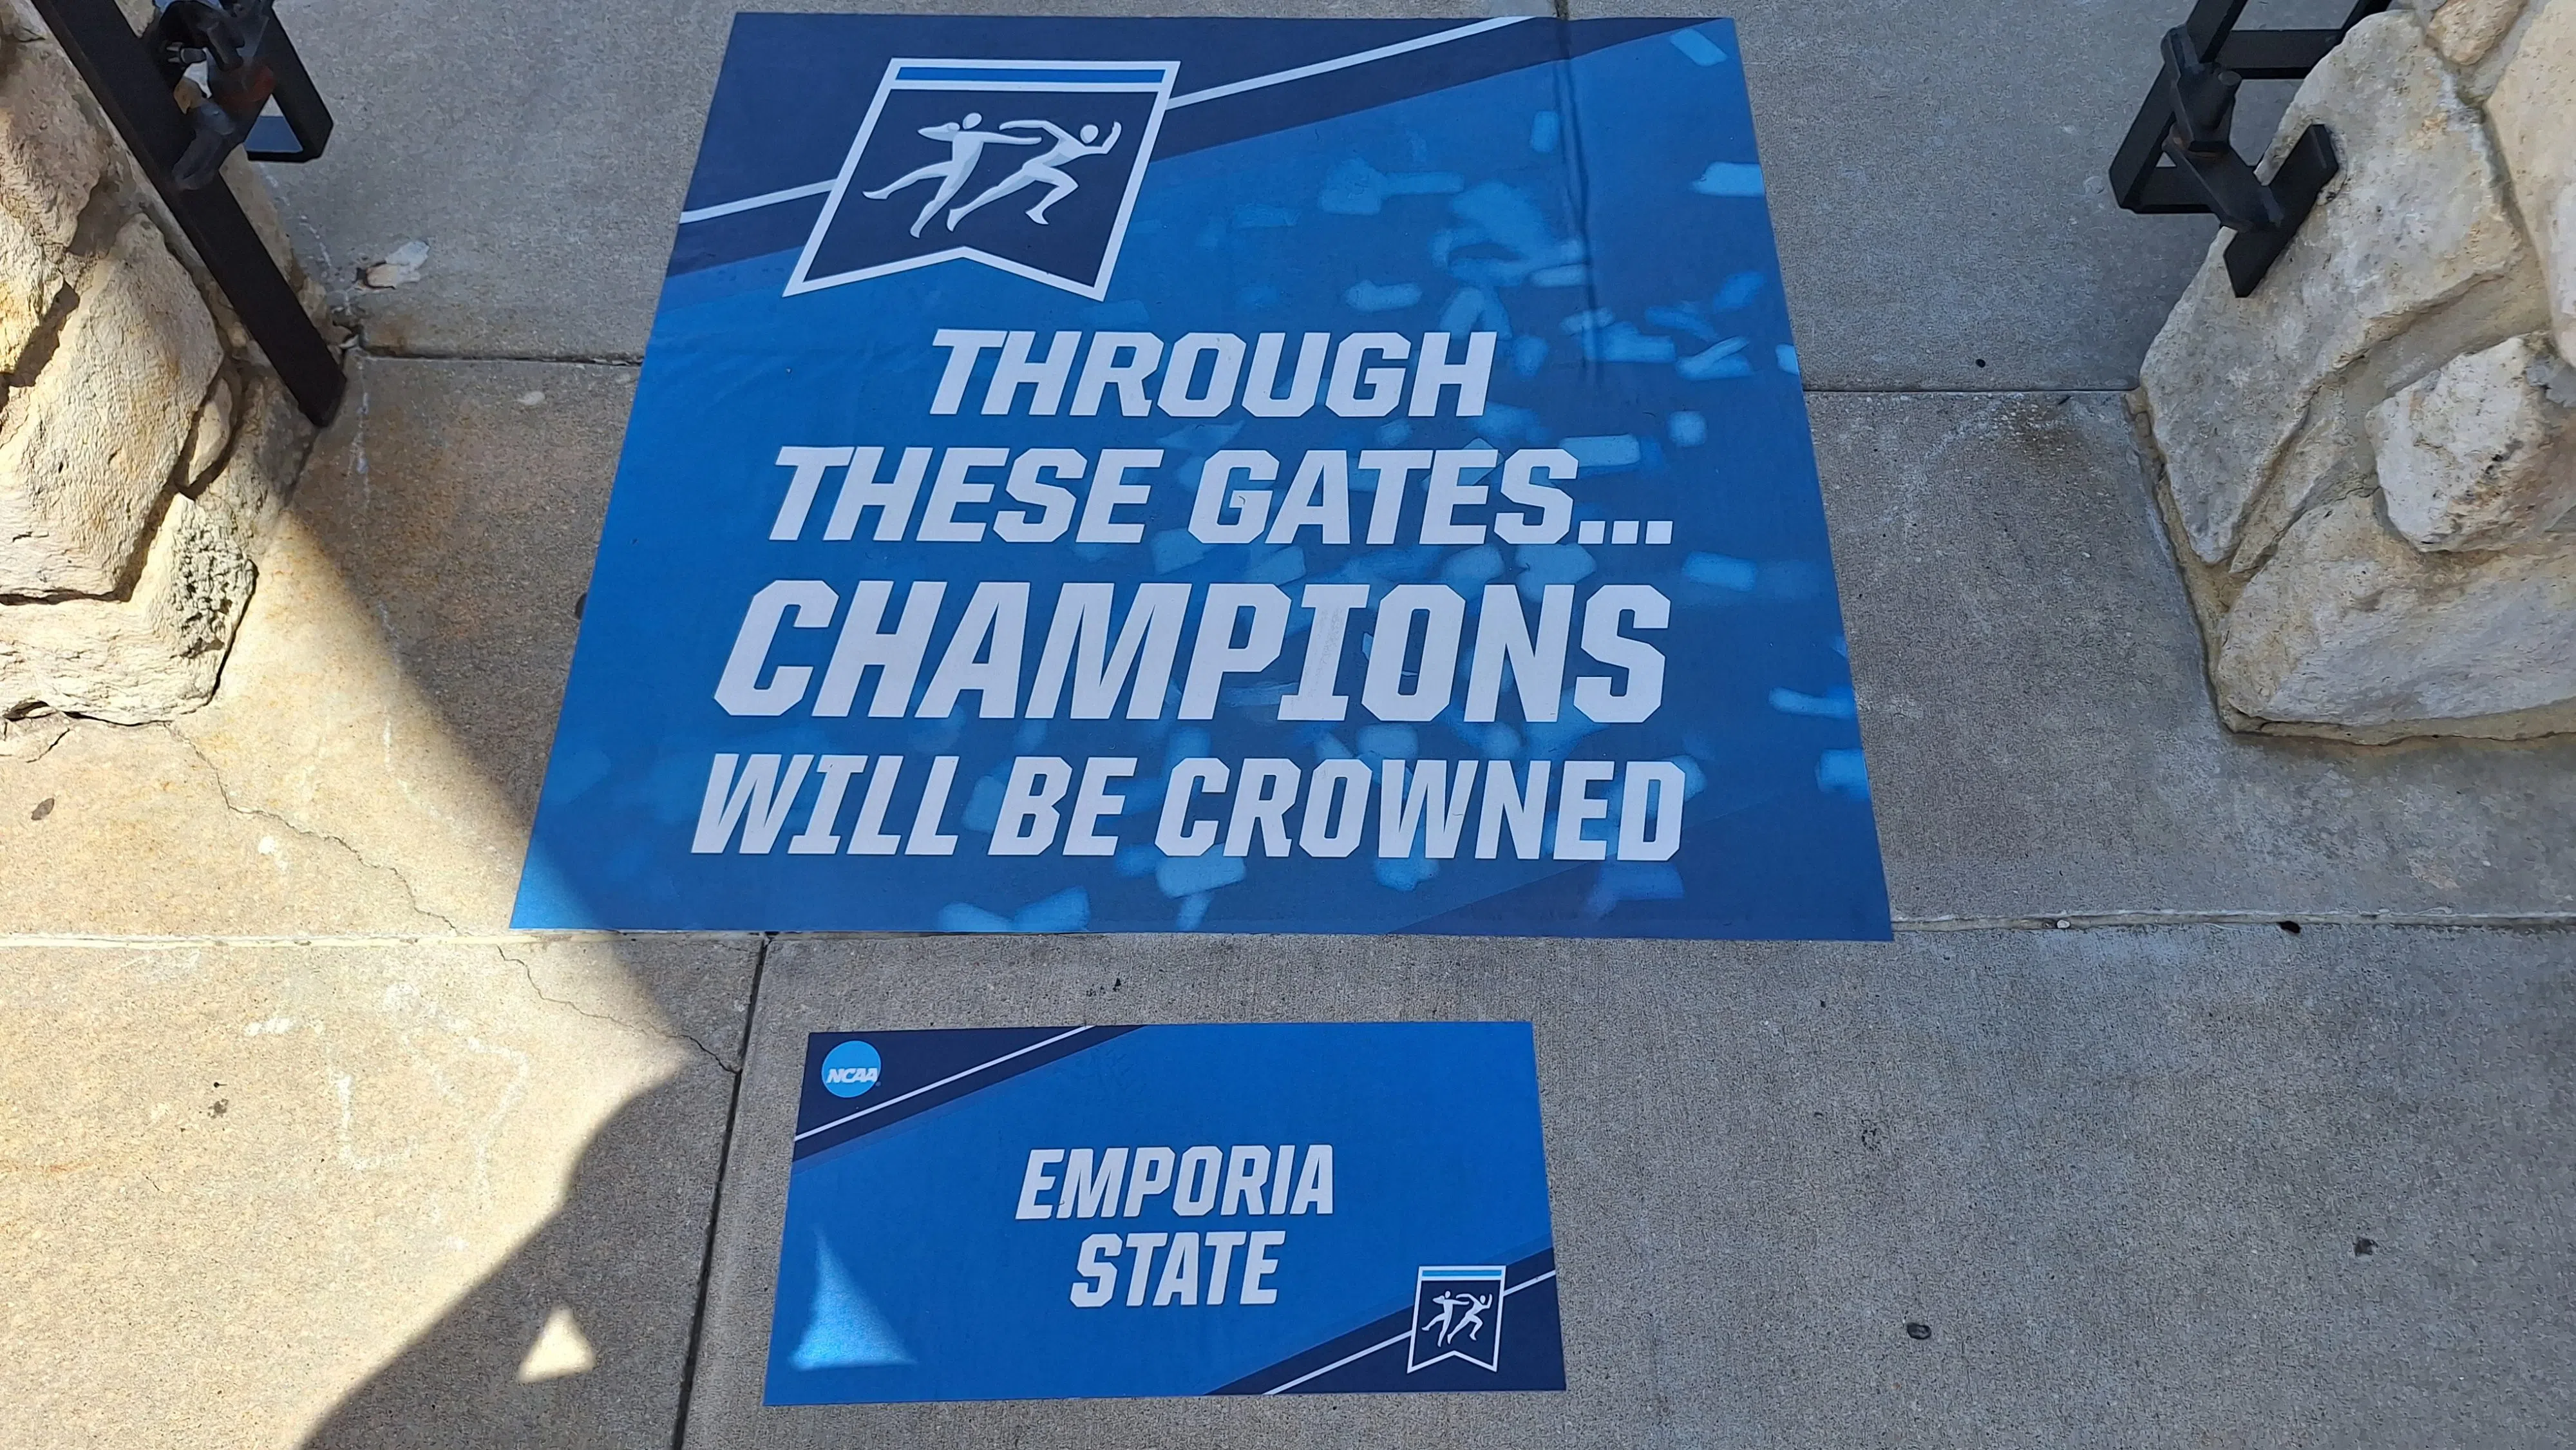 Organizers anticipating another day for the history books following record setting start to NCAA Division II National Track and Field Championships